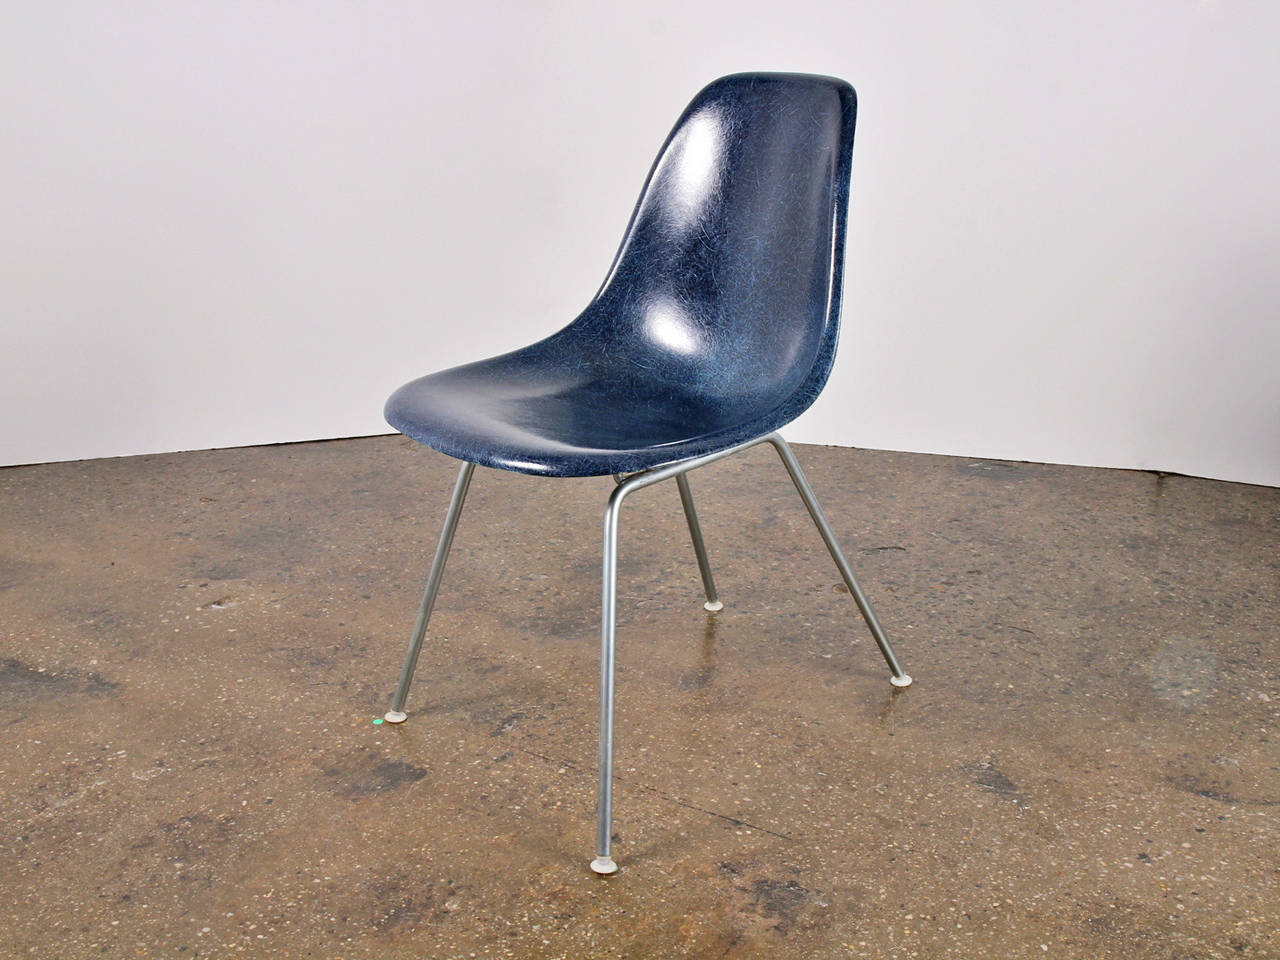 Original 1960s molded fiberglass shell chairs in Navy Blue, designed by Charles and Ray Eames for Herman Miller. Gleaming shells are in original condition, each with a distinct thready texture.  Shown here mounted on vintage H base, additional base